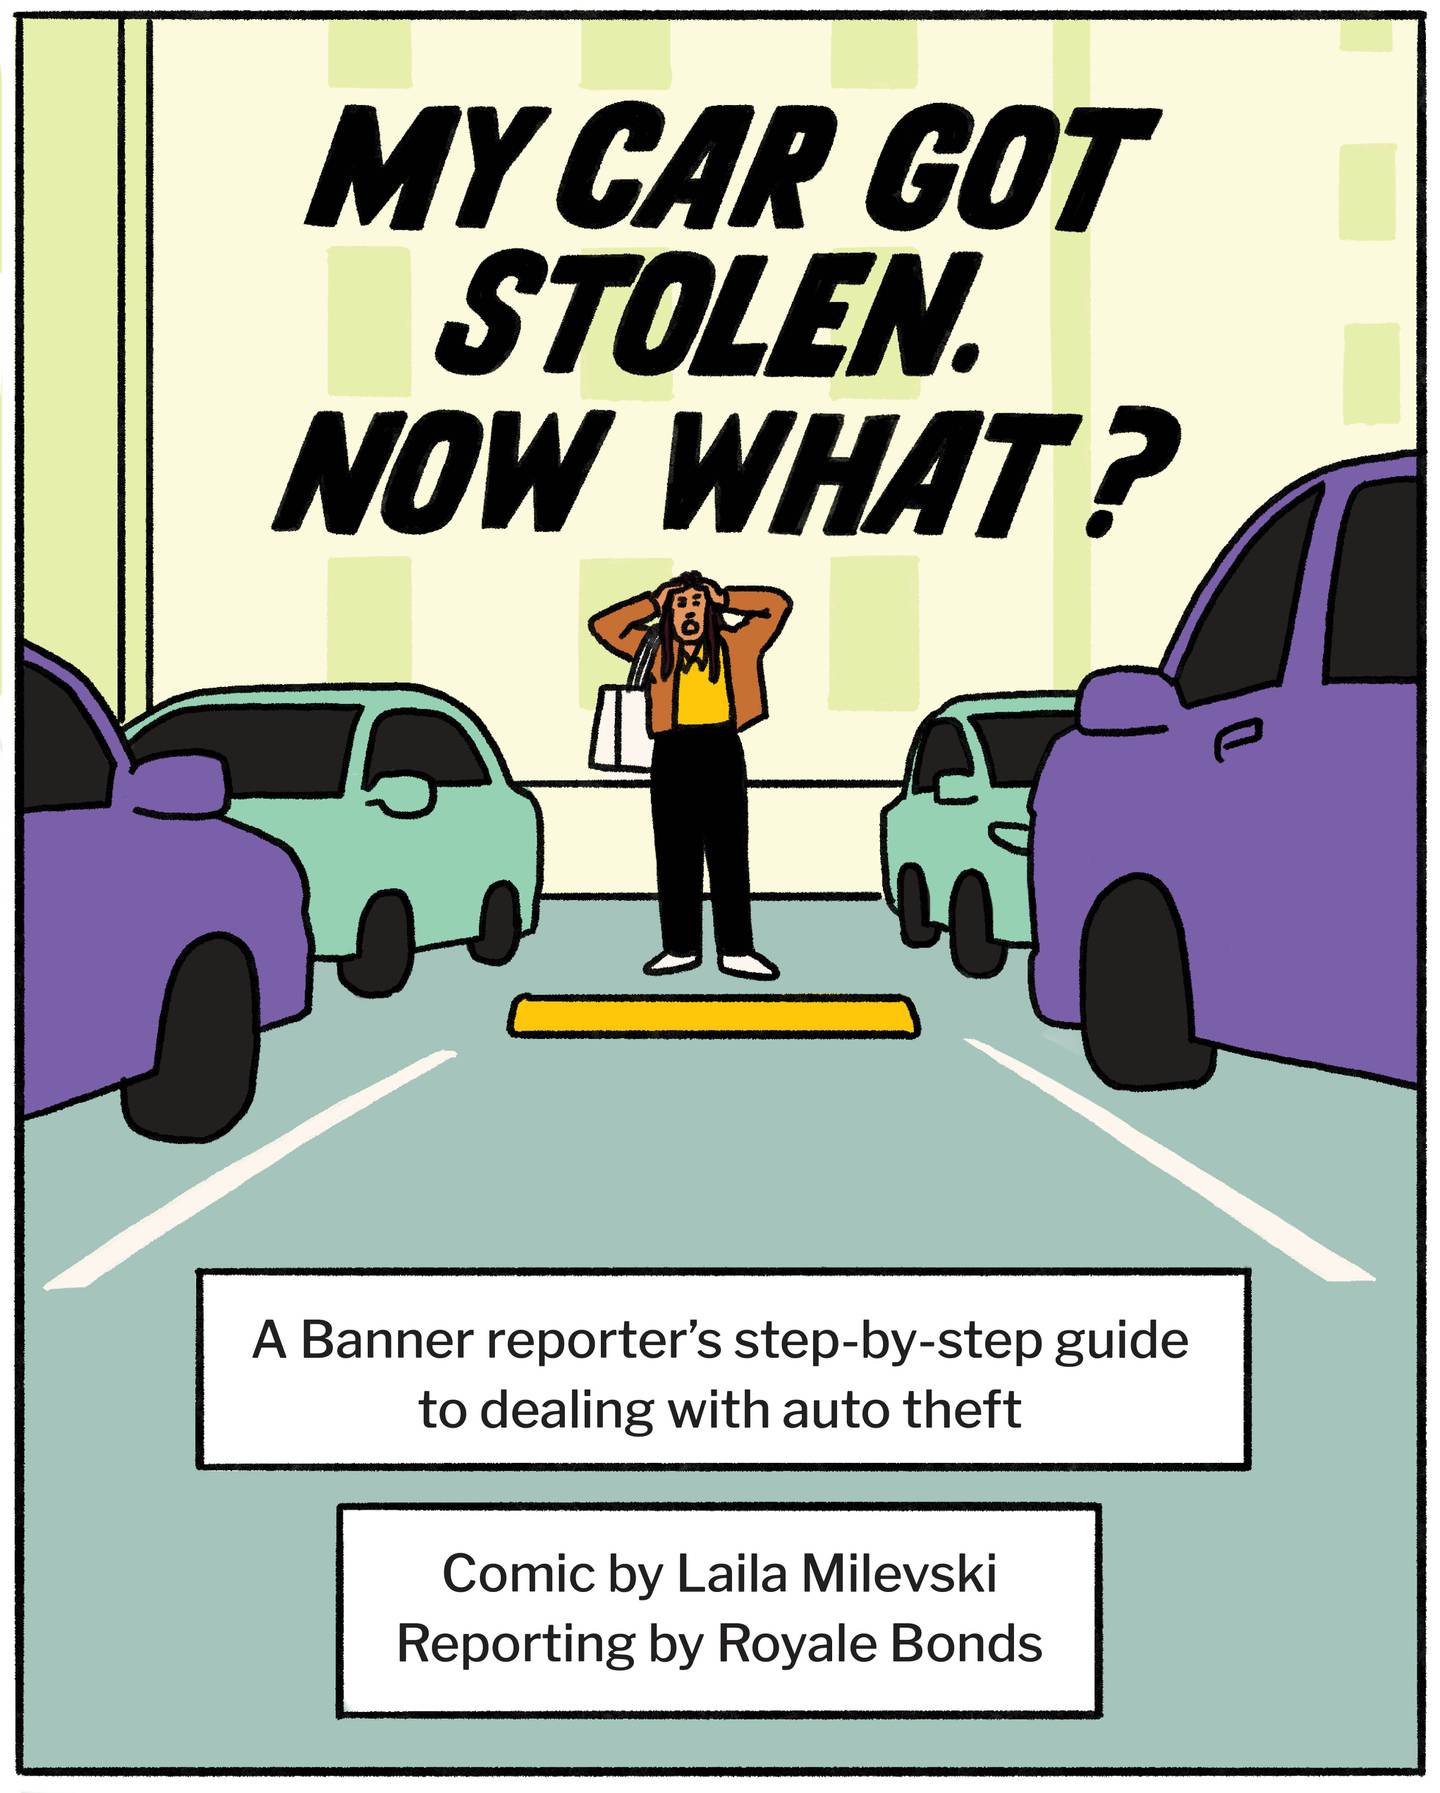 Illustration of woman standing in front of empty parking space, hands on her head. Title says "My car got stolen. Now what?" A Banner reporter's step-by-step guide to dealing with auto theft. Comic by Laila Milevski, reporting by Royale Bonds.